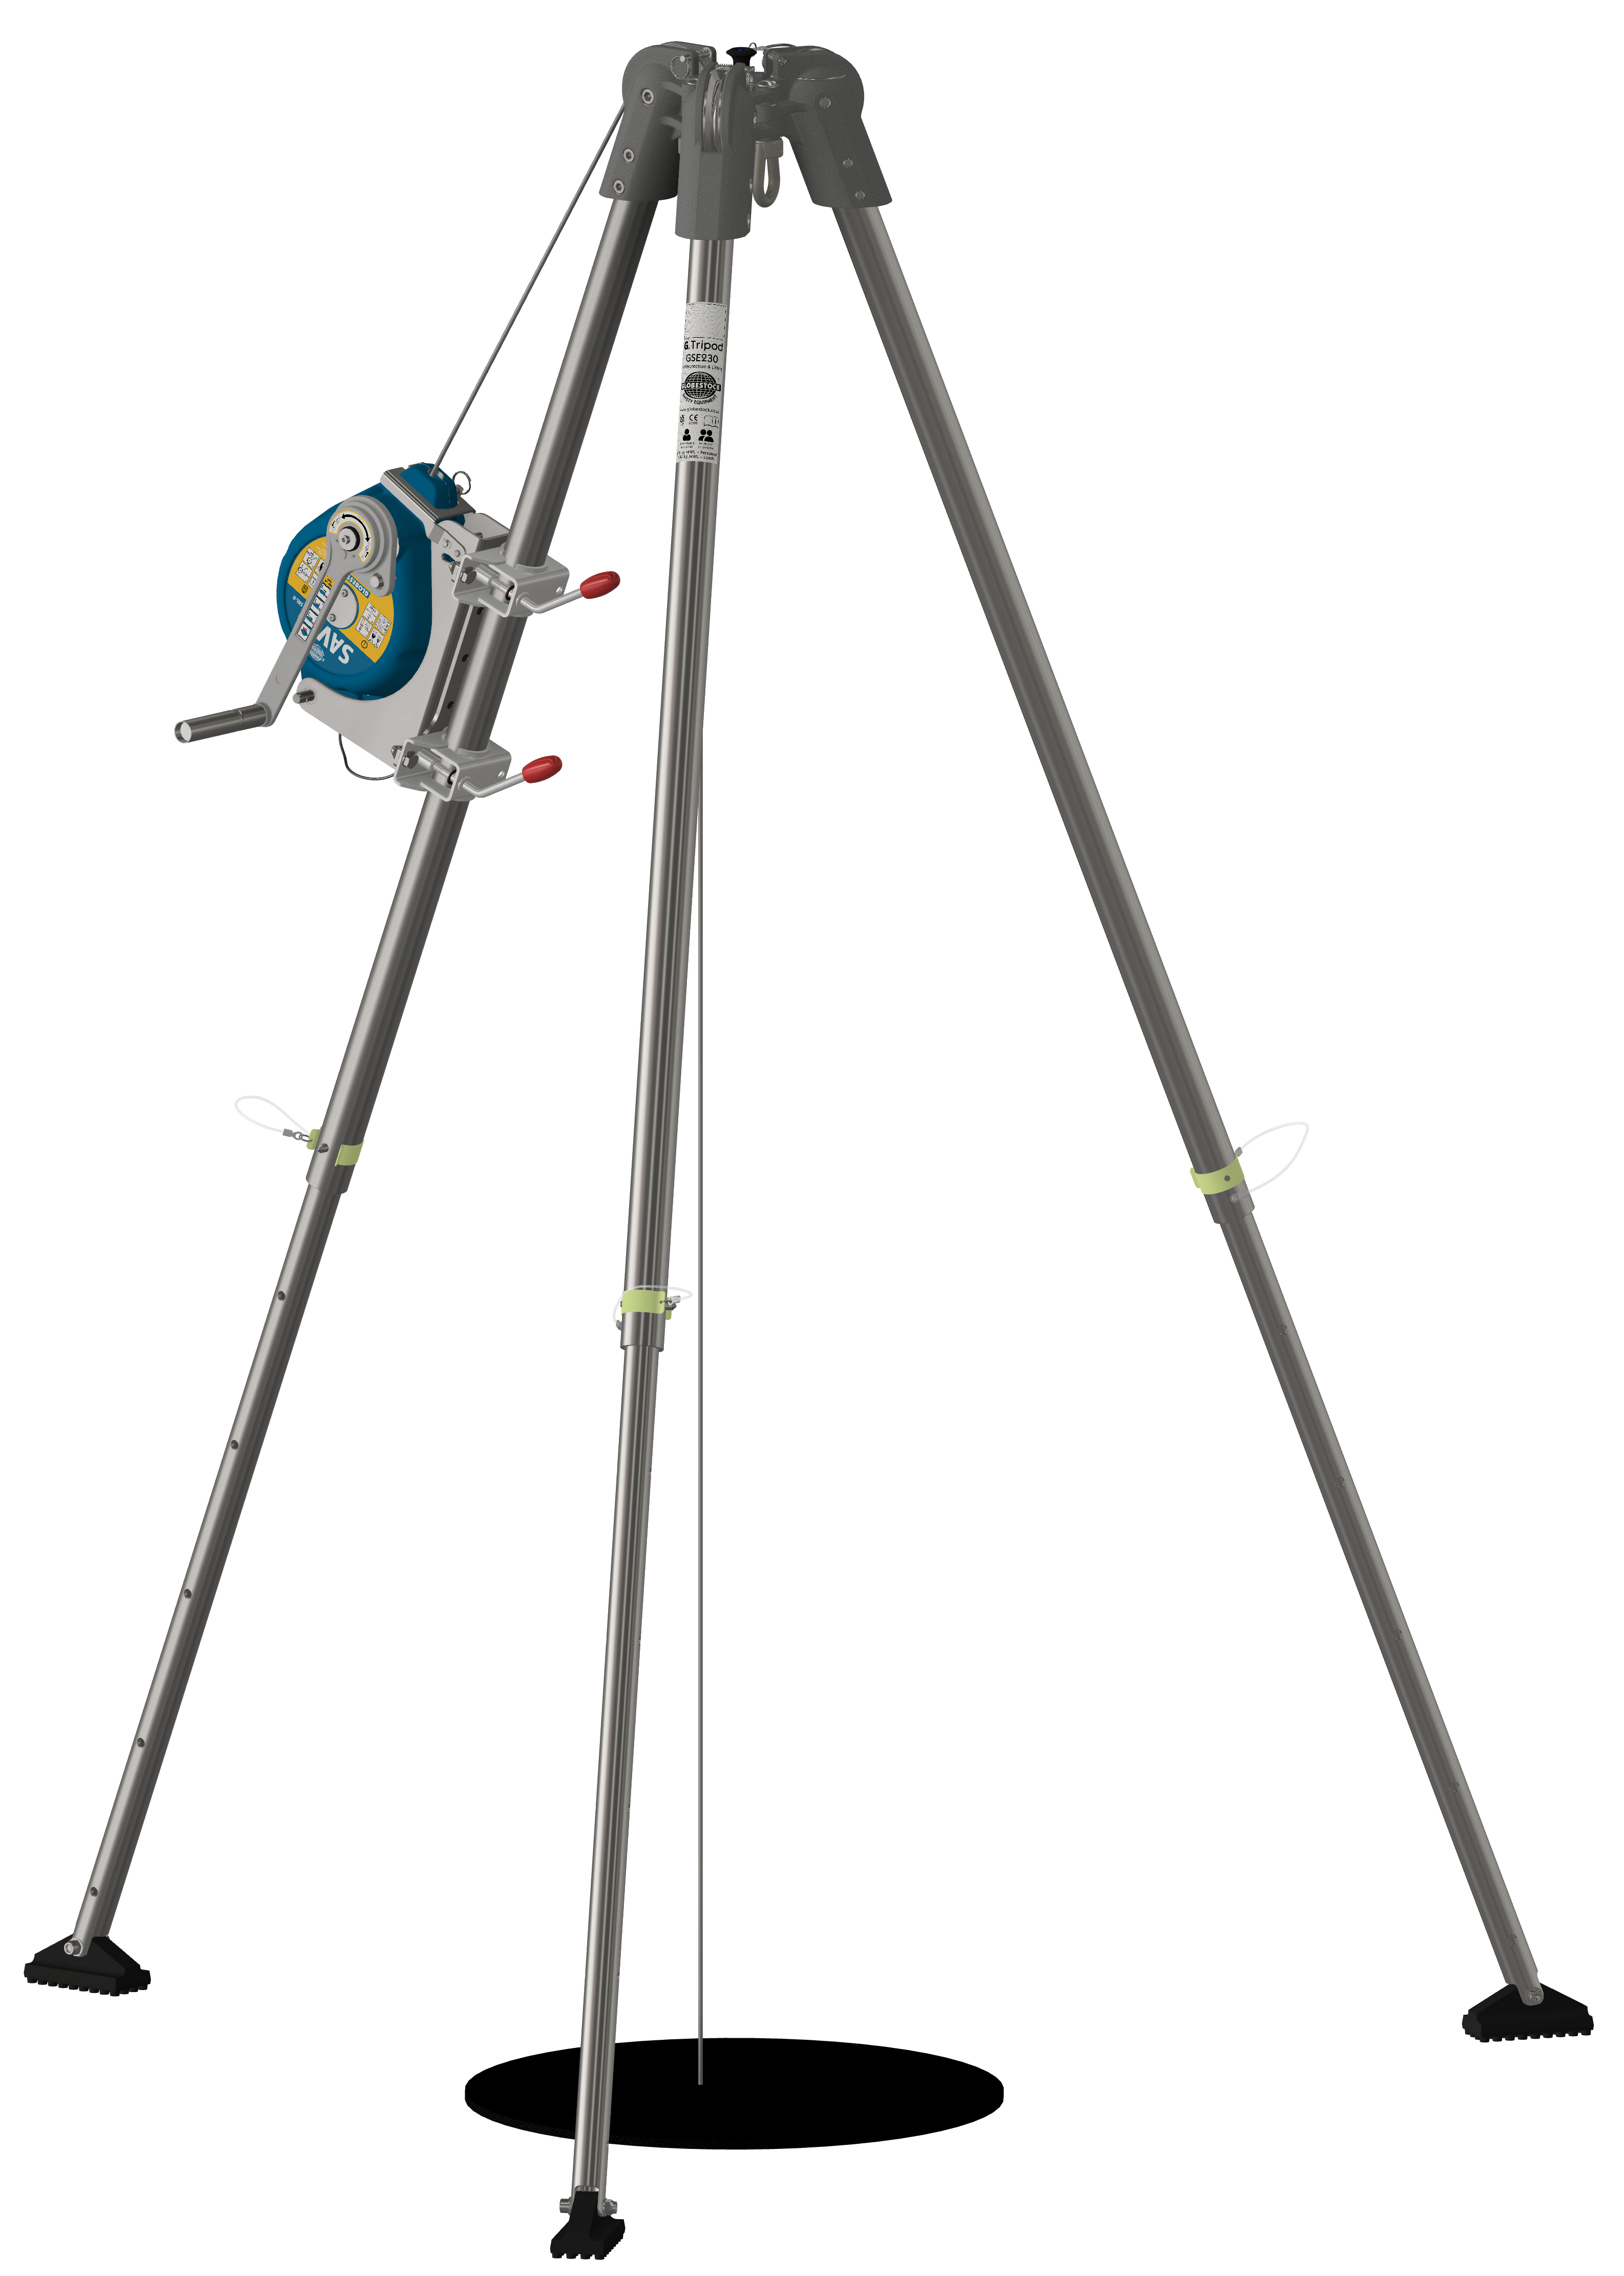 G.Tripod with SAVER fitted.